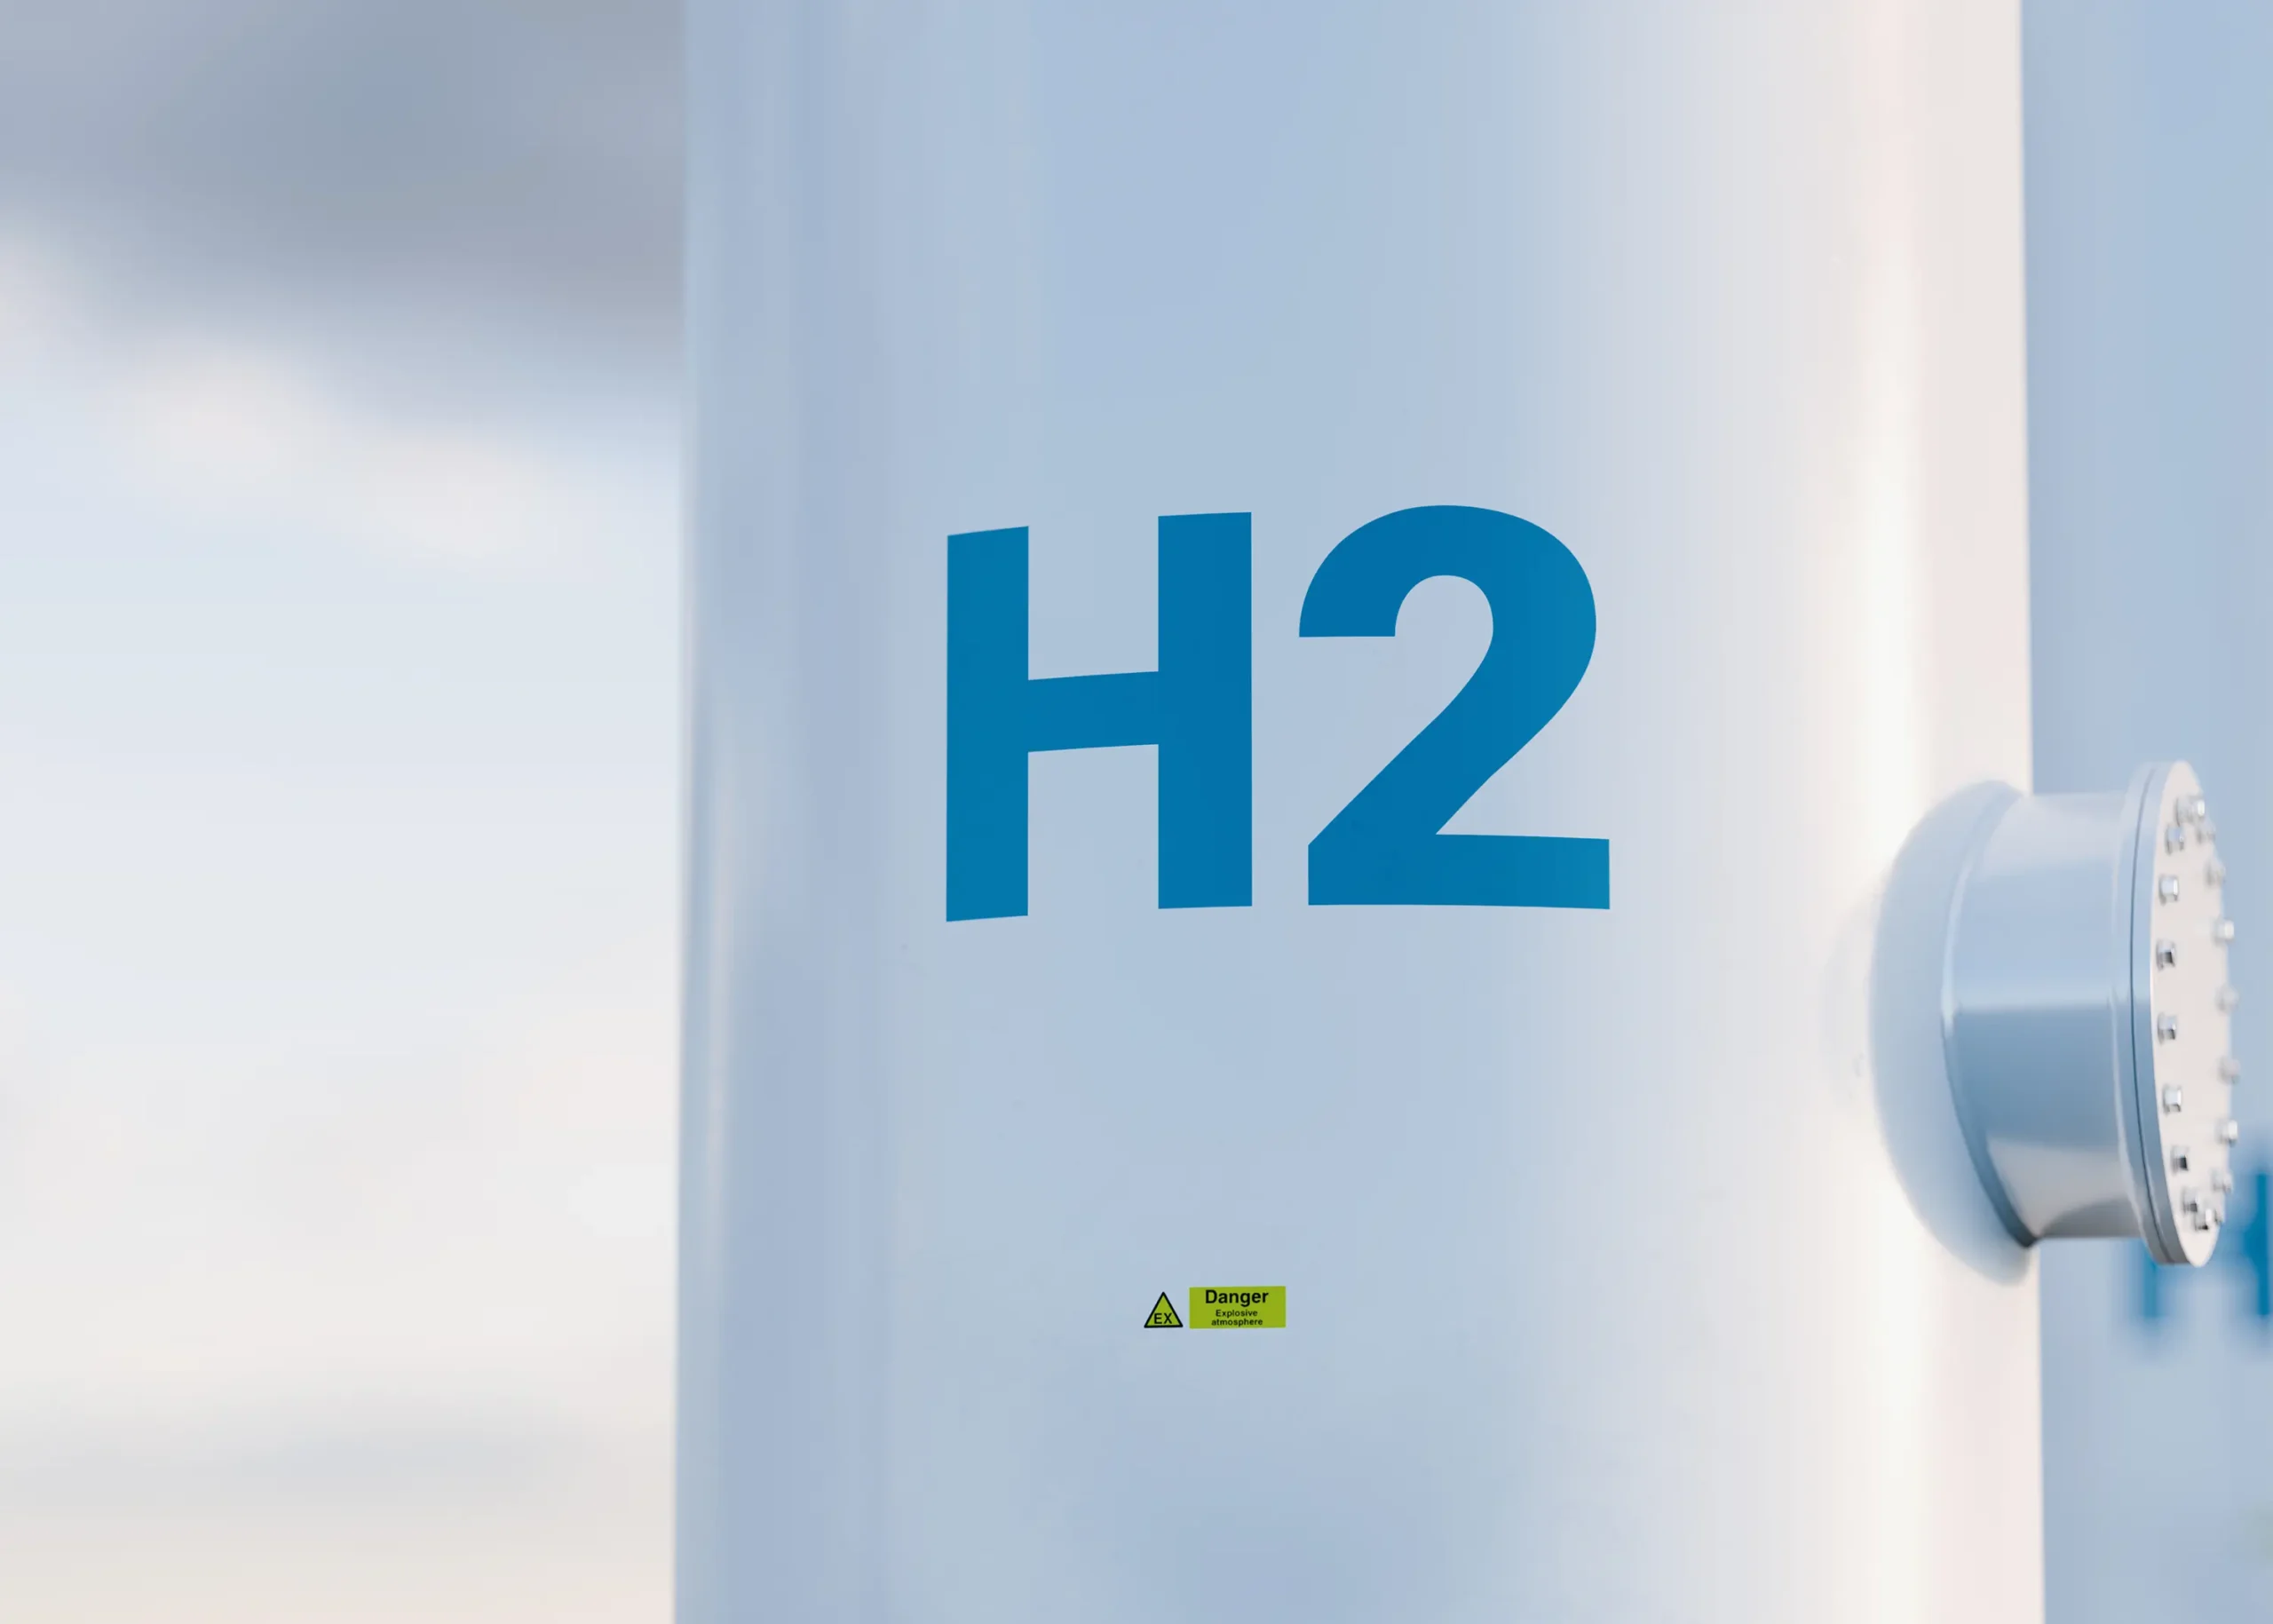 Hydrogen plant relies on high-performance industrial valve solutions like pressure relief valves, safeguarding clean electricity production from solar and wind.